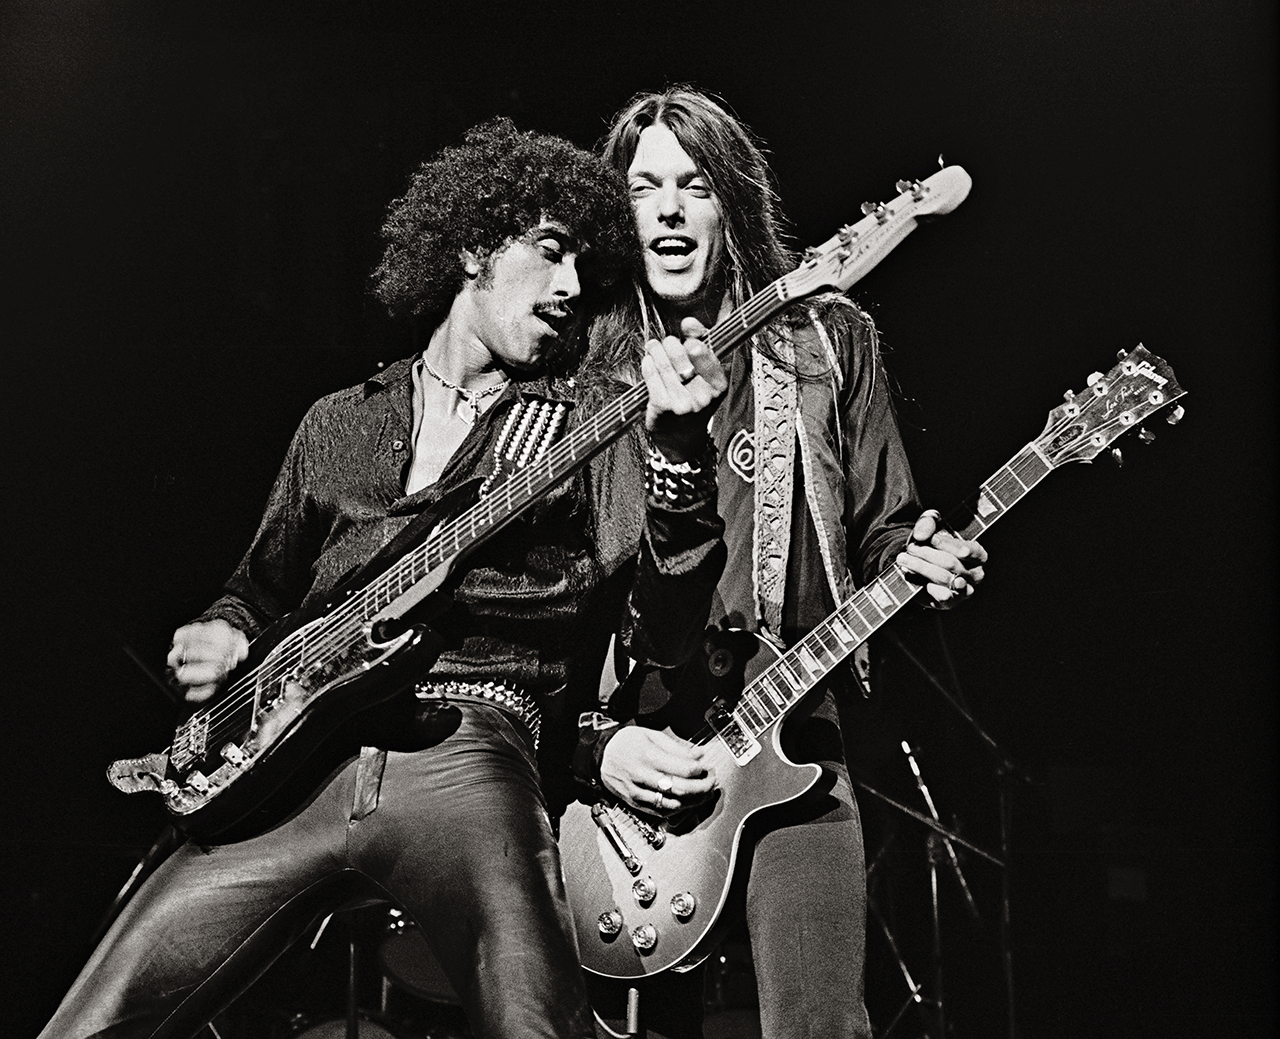 Phil Lynott and Scott Gorham with Thin Lizzy at Hammersmith Odeon in 1978